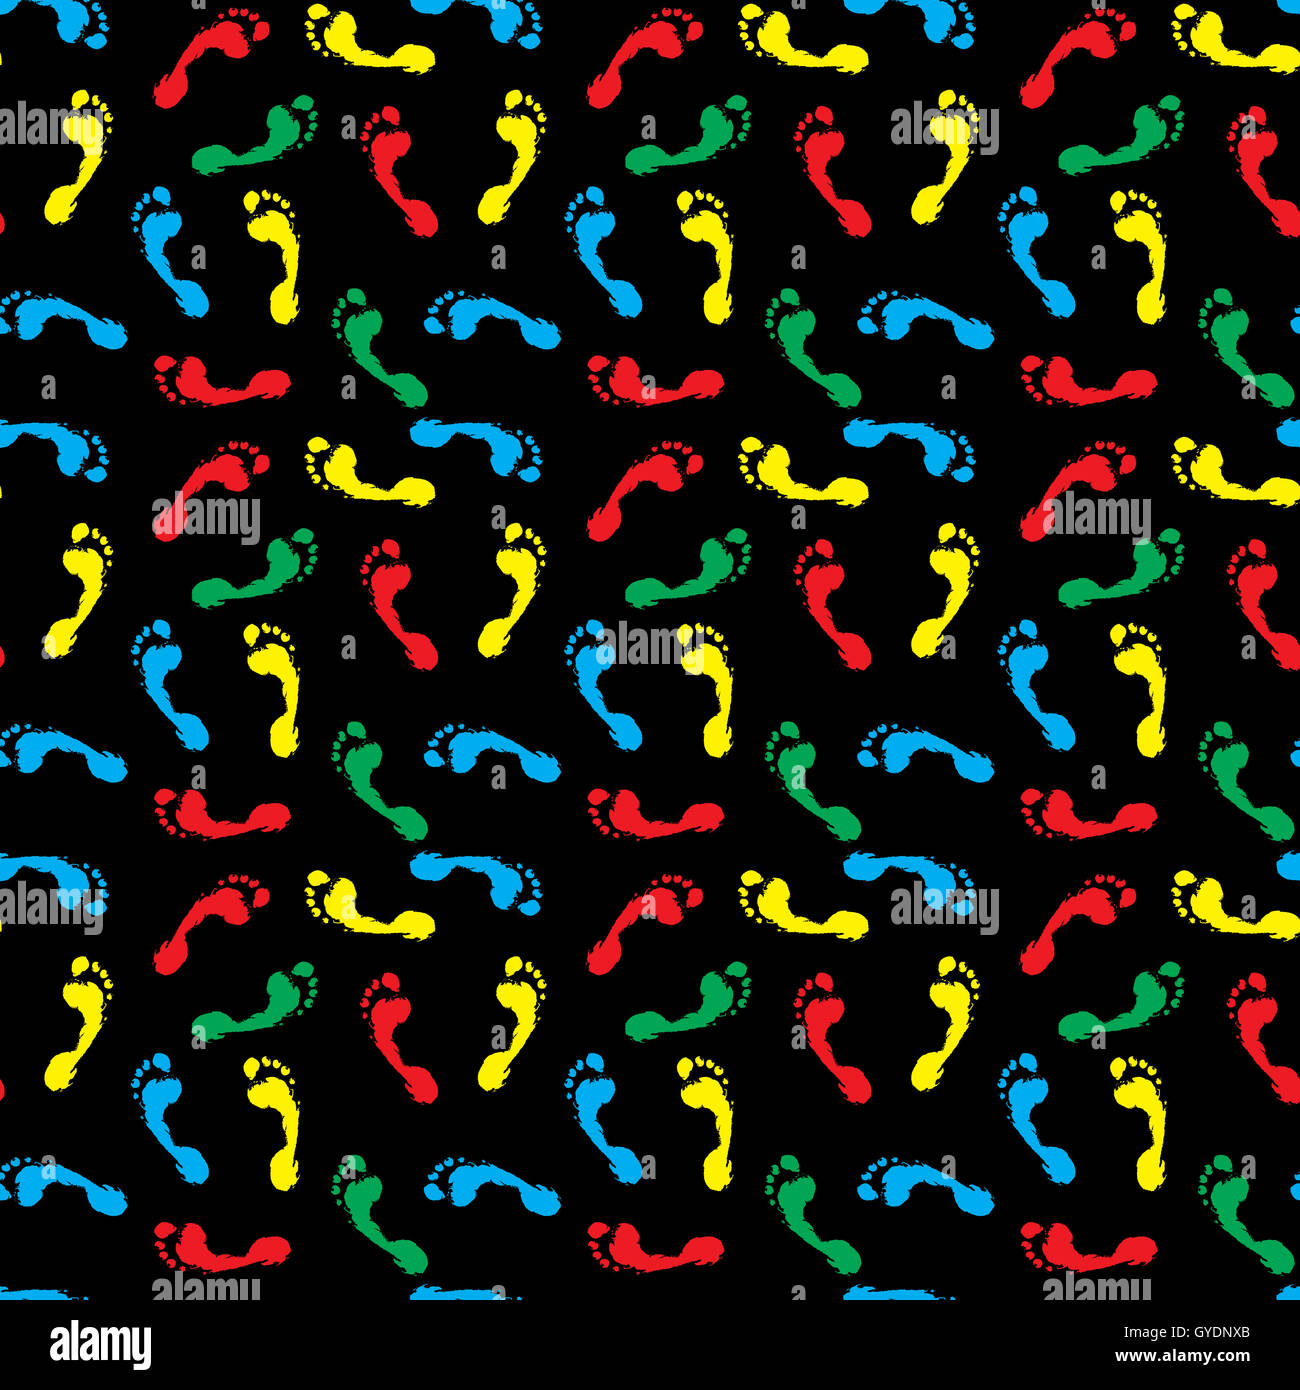 Seamless pattern colored foot print. Footprint and foot steps, vector illustration Stock Photo